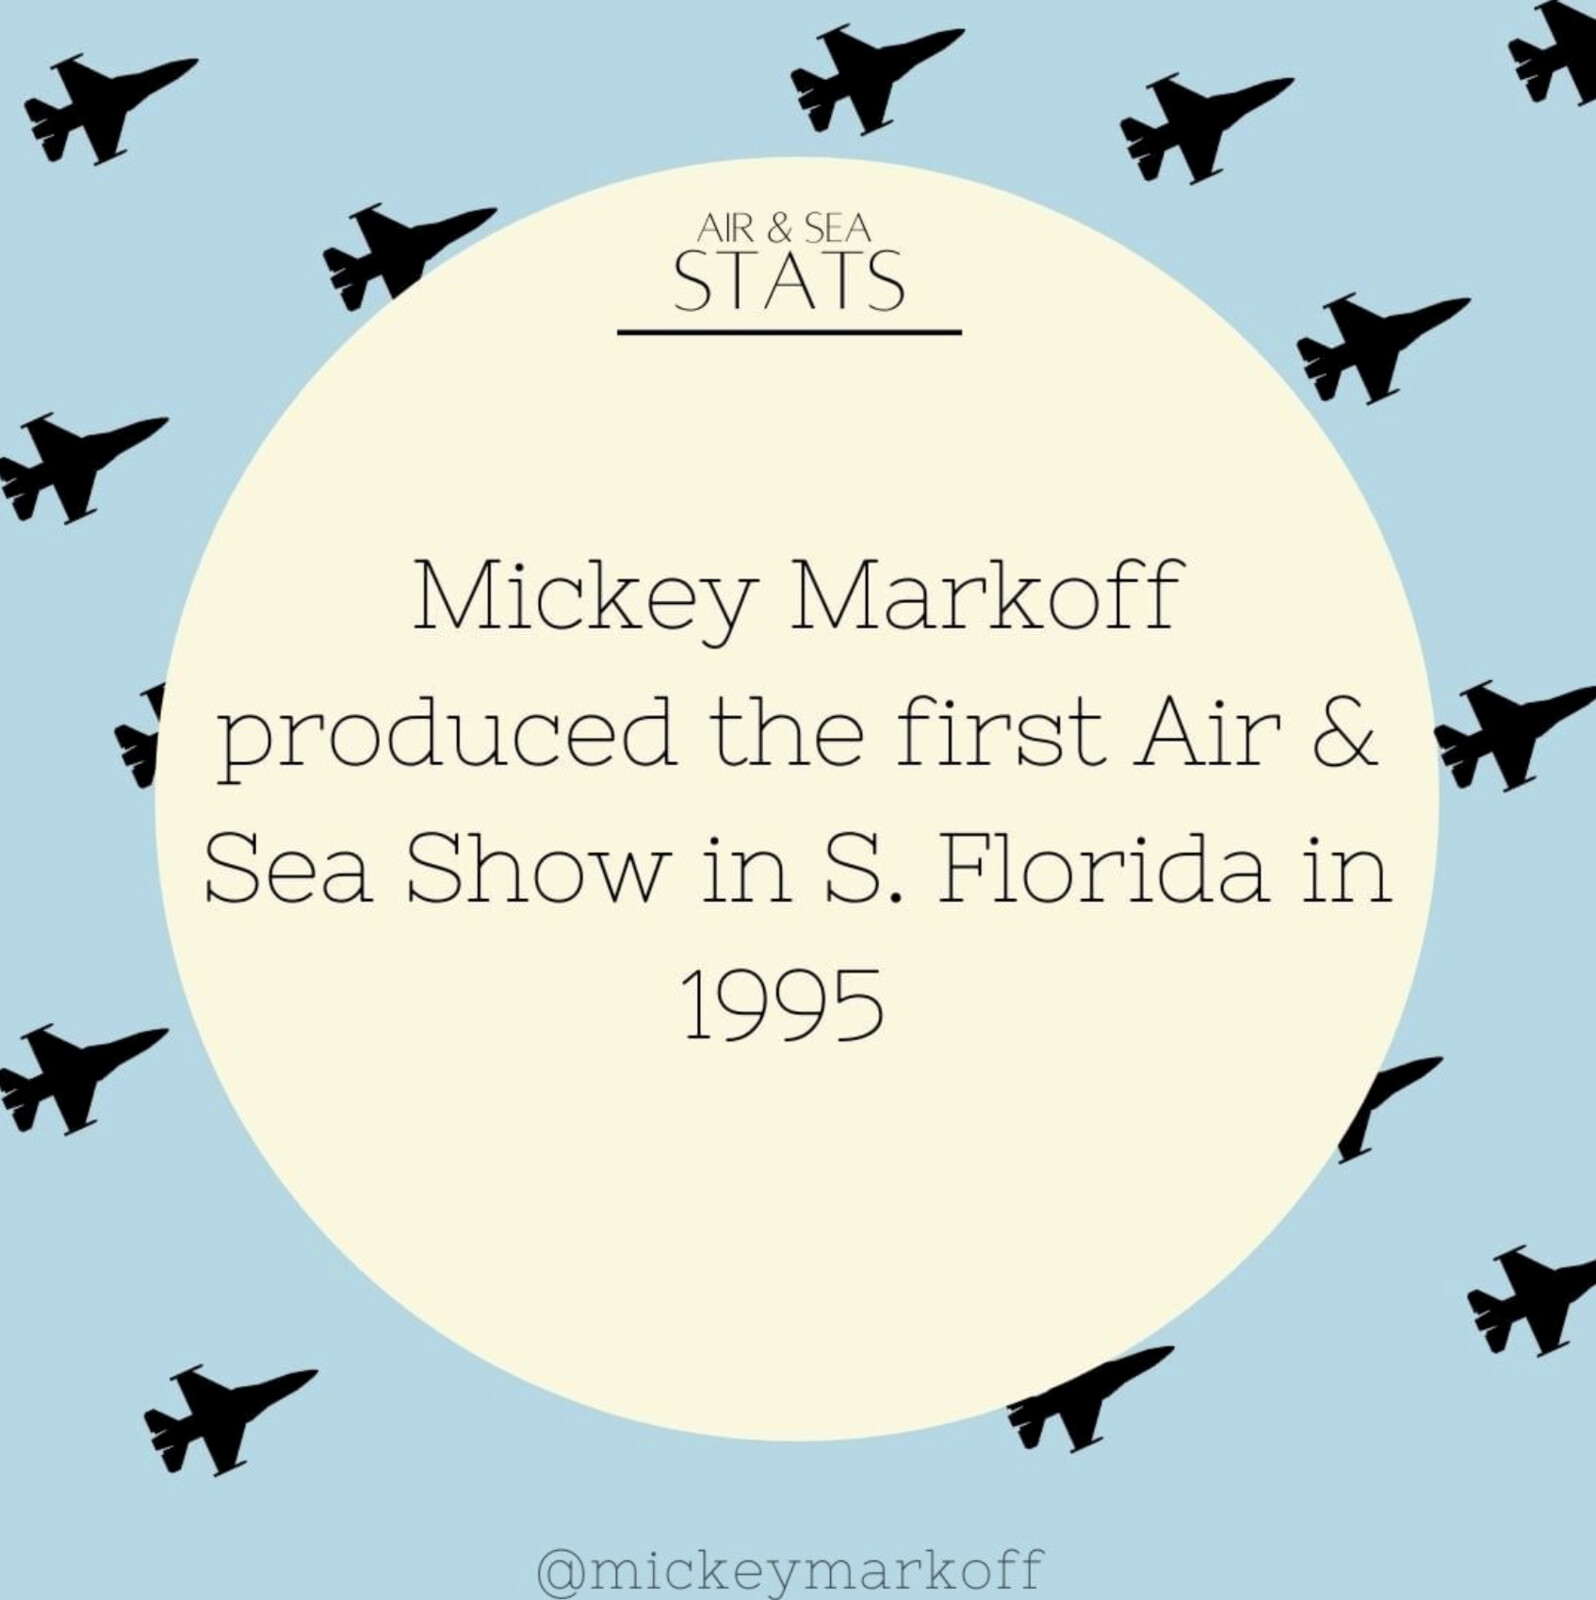 Mickey Markoff - Air and Sea Show Executive Producer - "Air and Sea Show"
